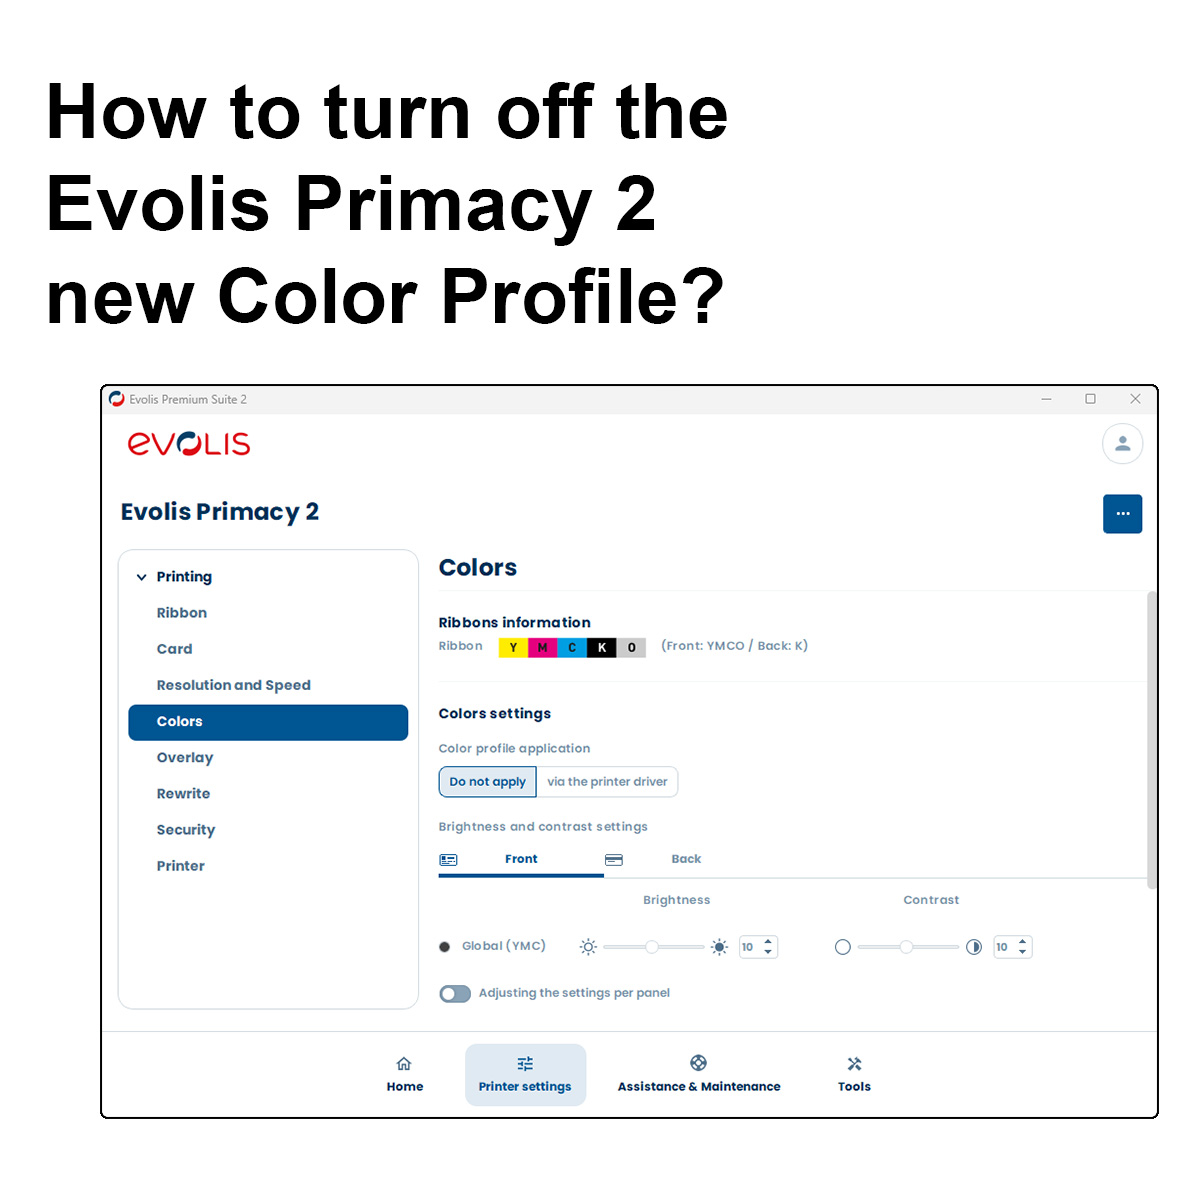 How to turn off the Evolis Primacy 2 new Color Profile